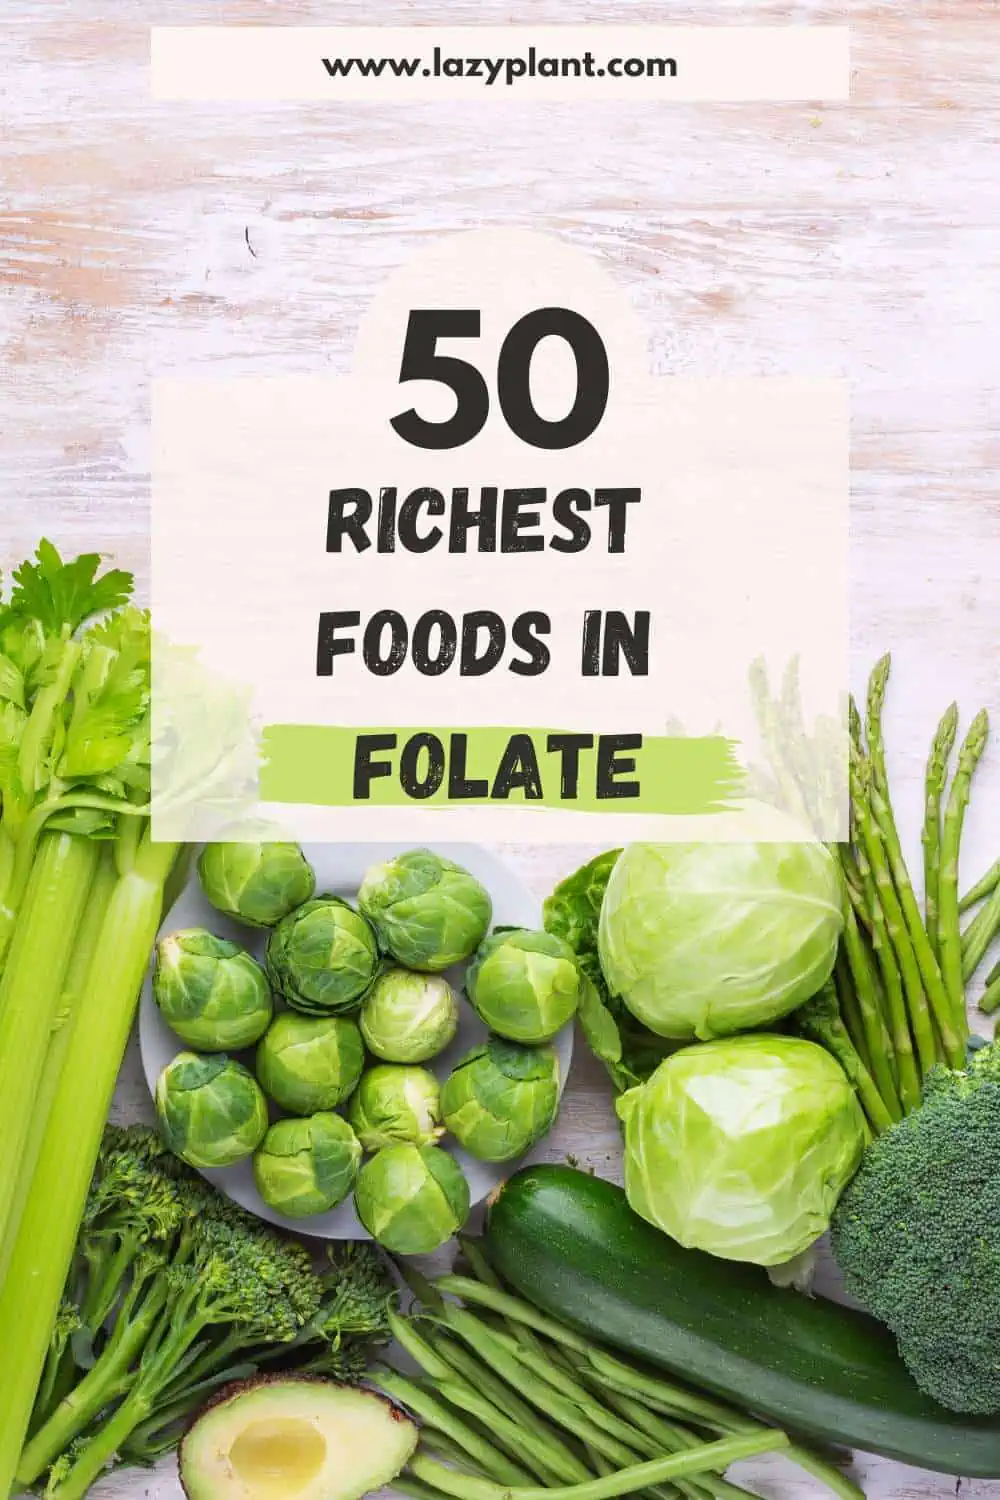 What are the richest foods in folate (folic acid)?